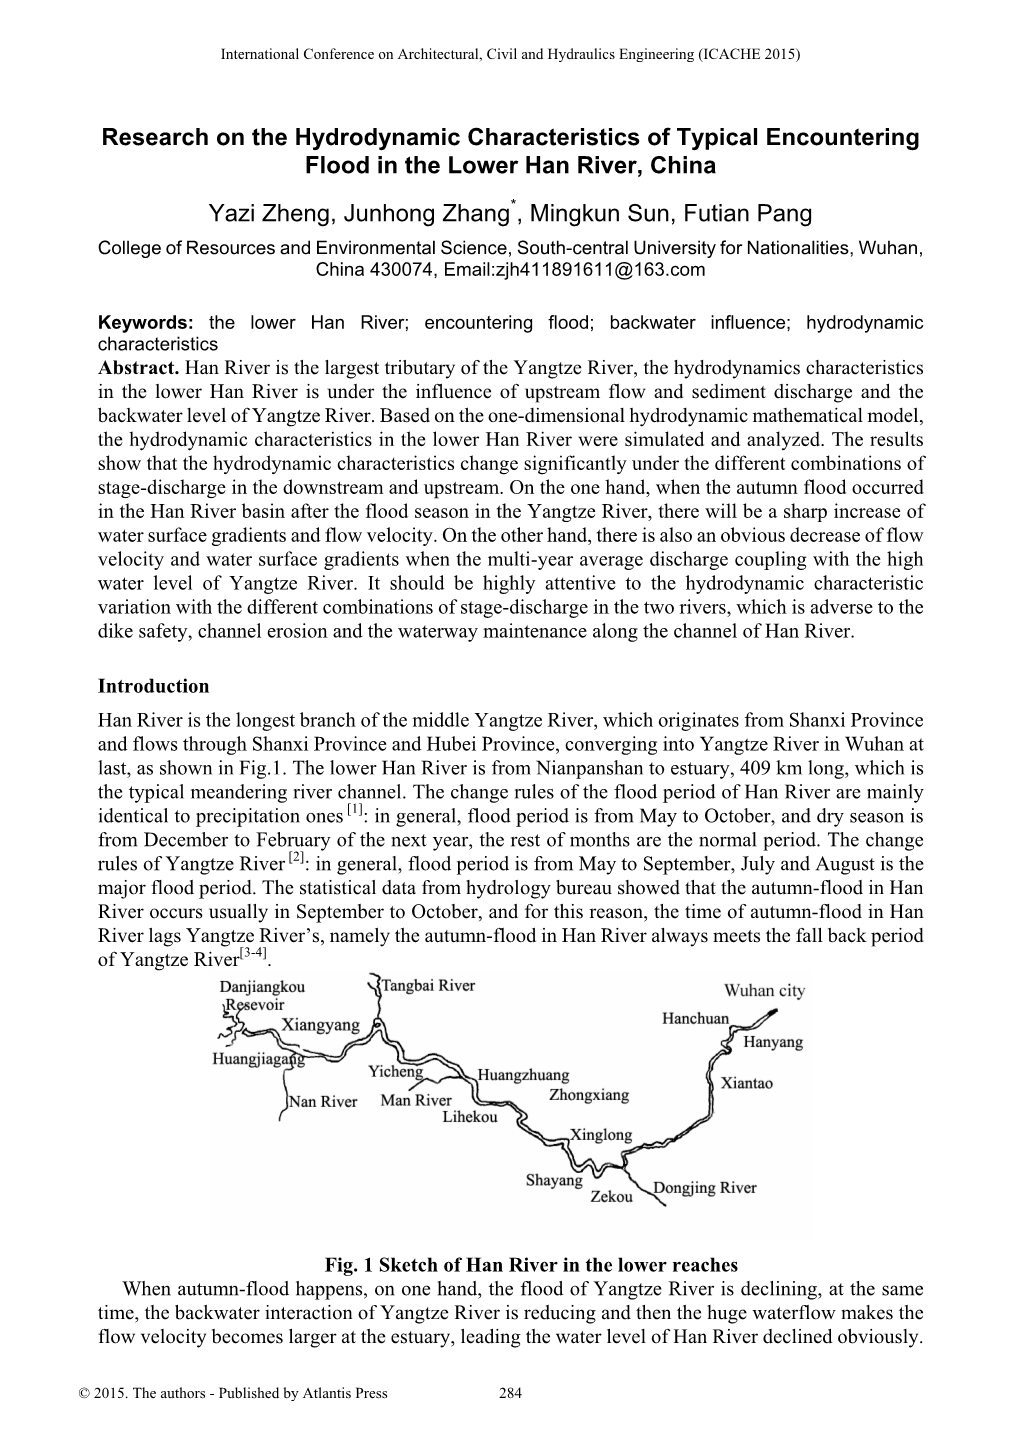 Research on the Hydrodynamic Characteristics of Typical Encountering Flood in the Lower Han River, China Yazi Zheng, Junhong